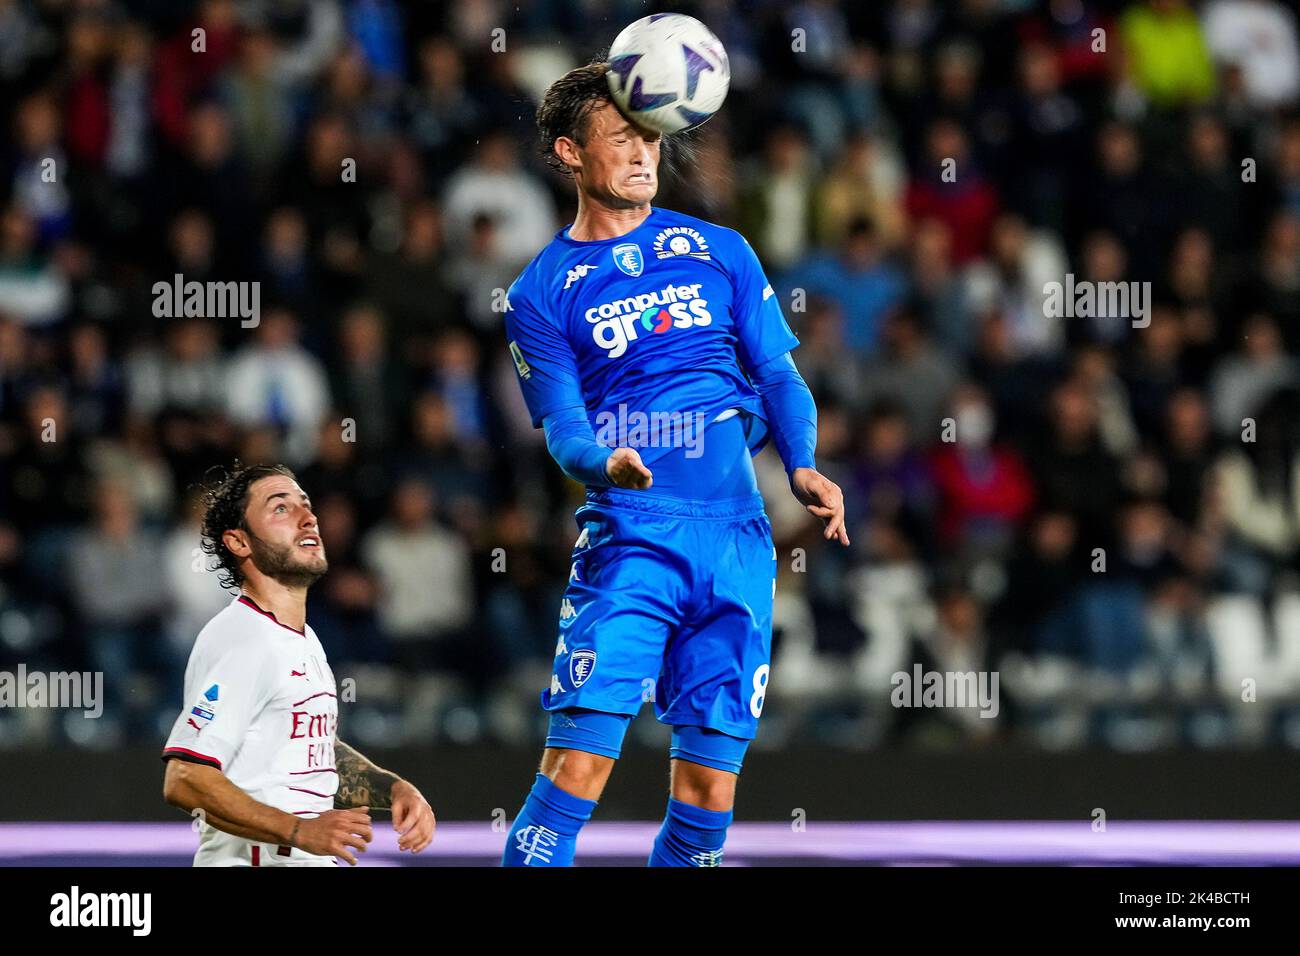 Empoli, Italy. 01st Oct, 2022. Liam Henderson of Empoli FC in action during the Serie A football match between Empoli FC and AC Milan at Carlo Castellani stadium in Empoli (Italy), October 1st, 2022. Photo Paolo Nucci/Insidefoto Credit: Insidefoto di andrea staccioli/Alamy Live News Stock Photo